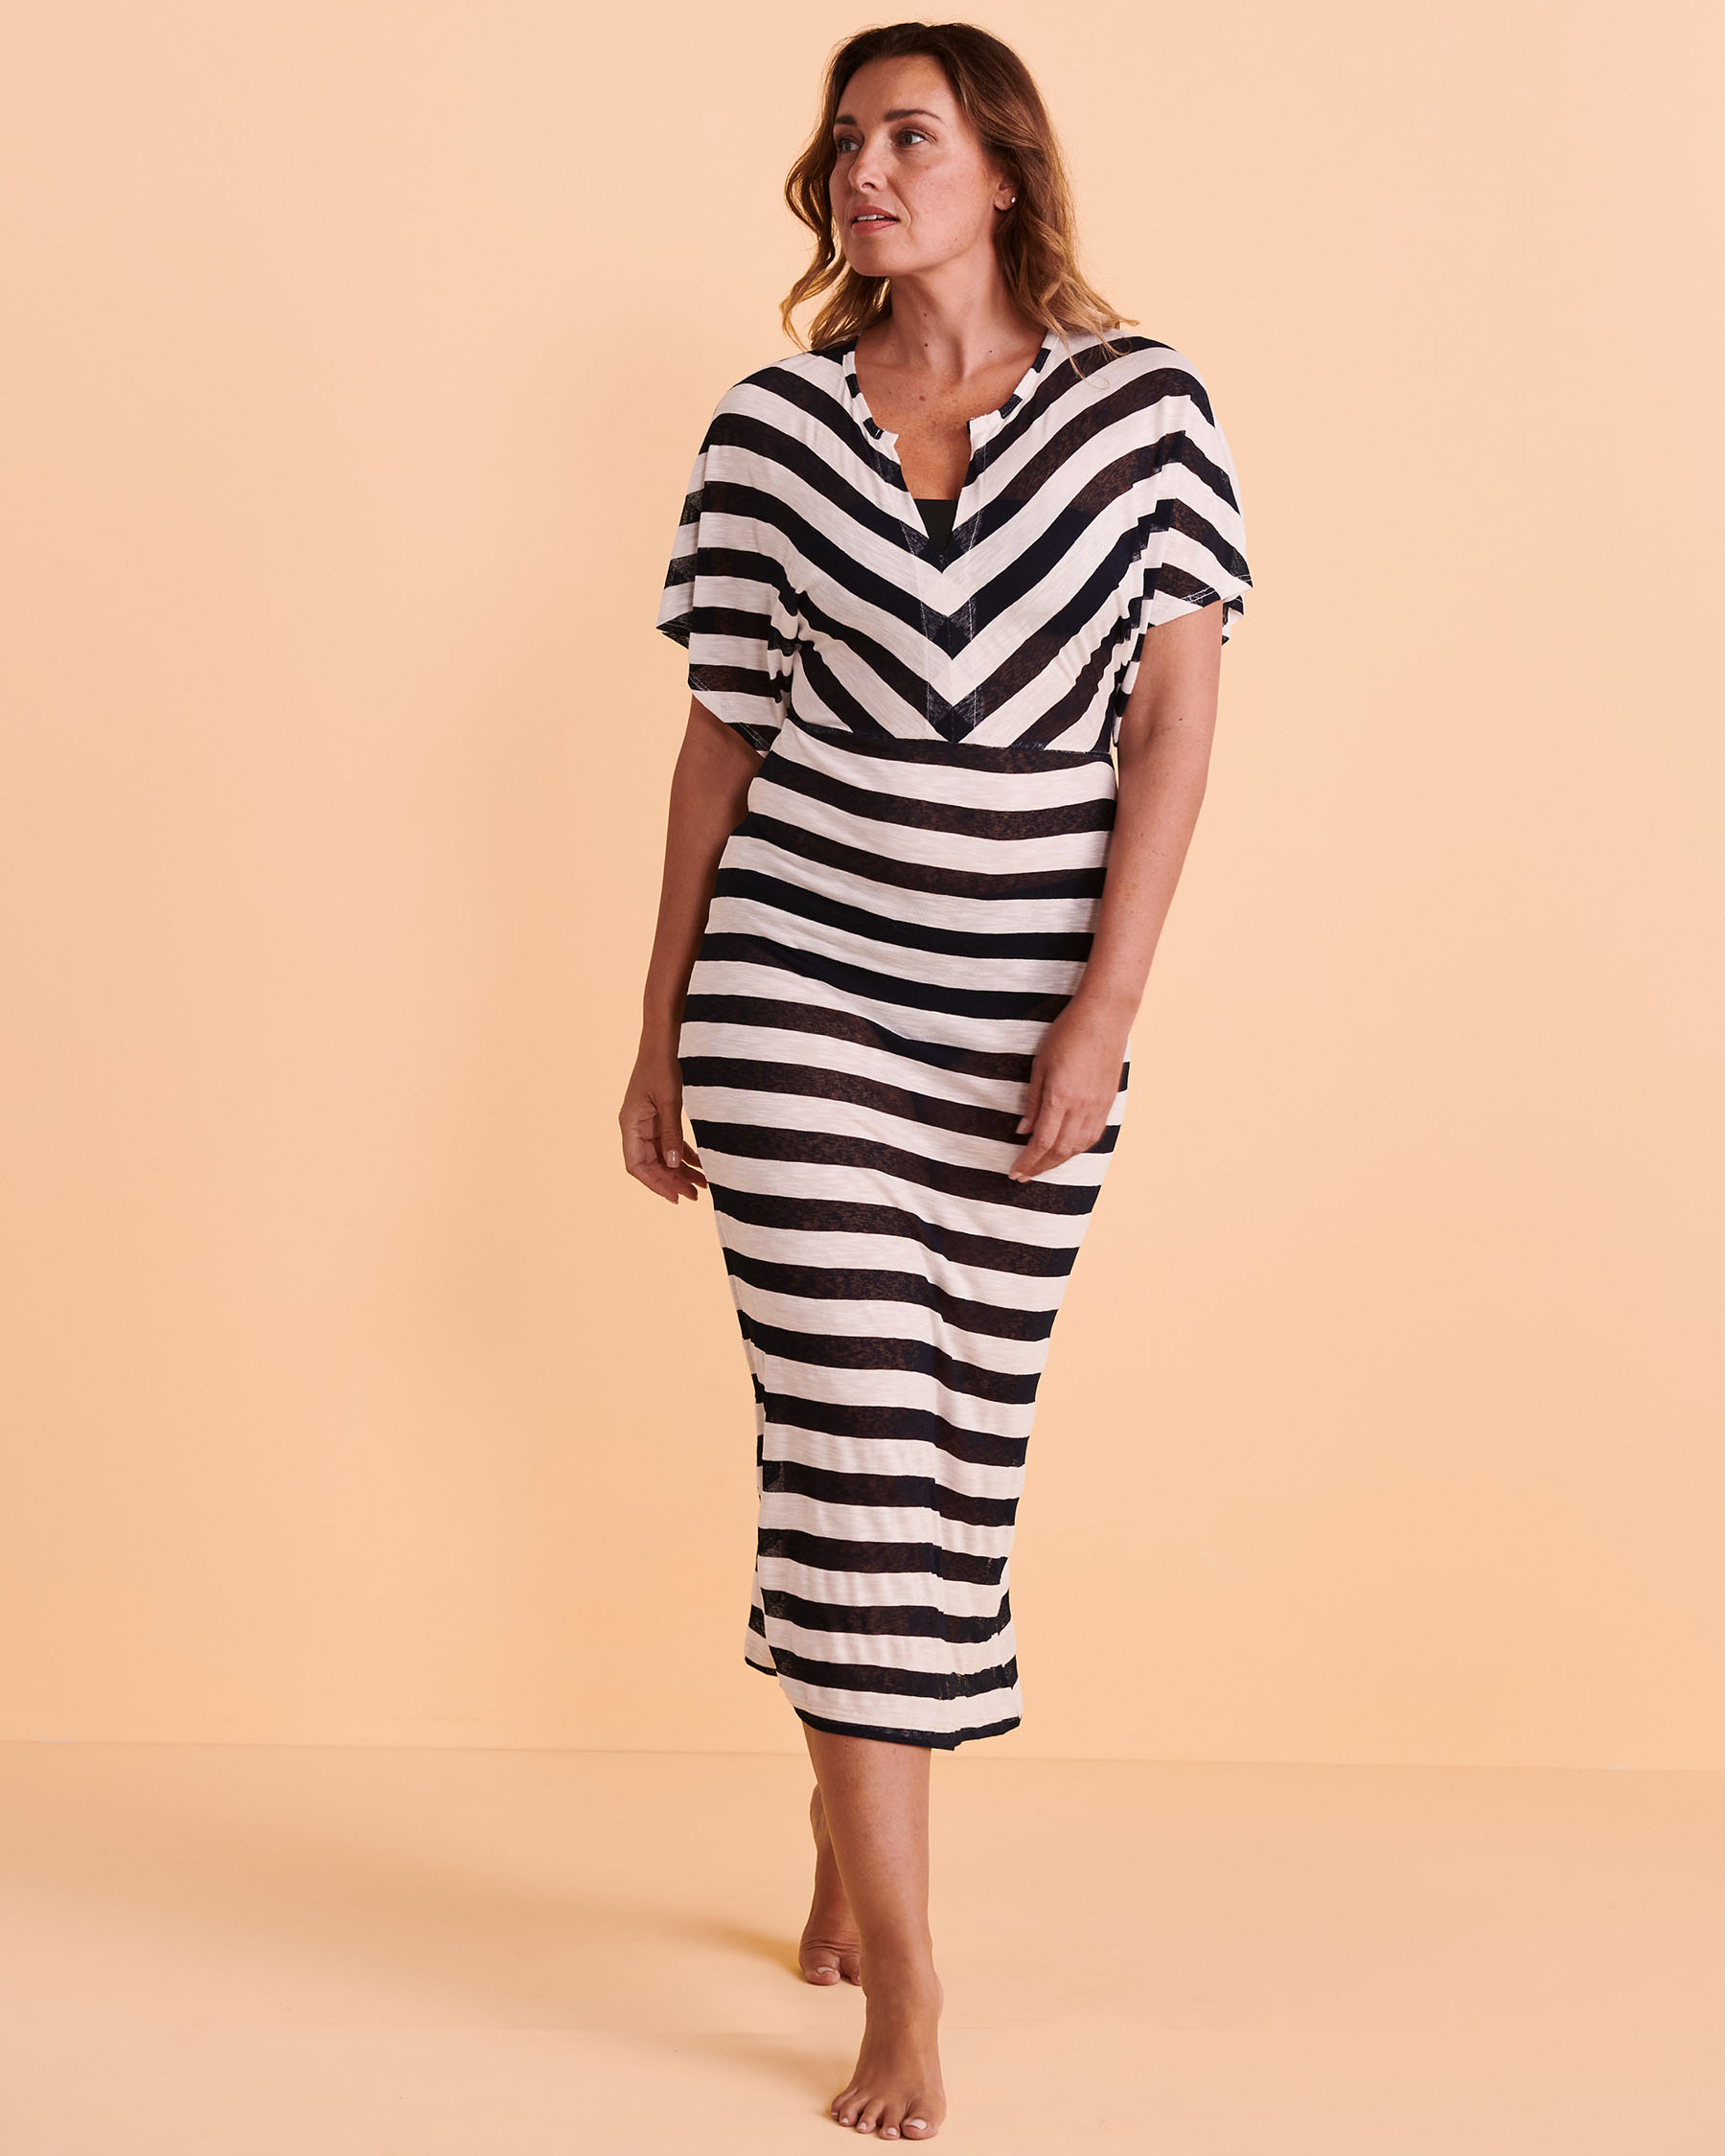 COVER ME Soft Jersey Maxi Dress Stripes 23028765 - View1